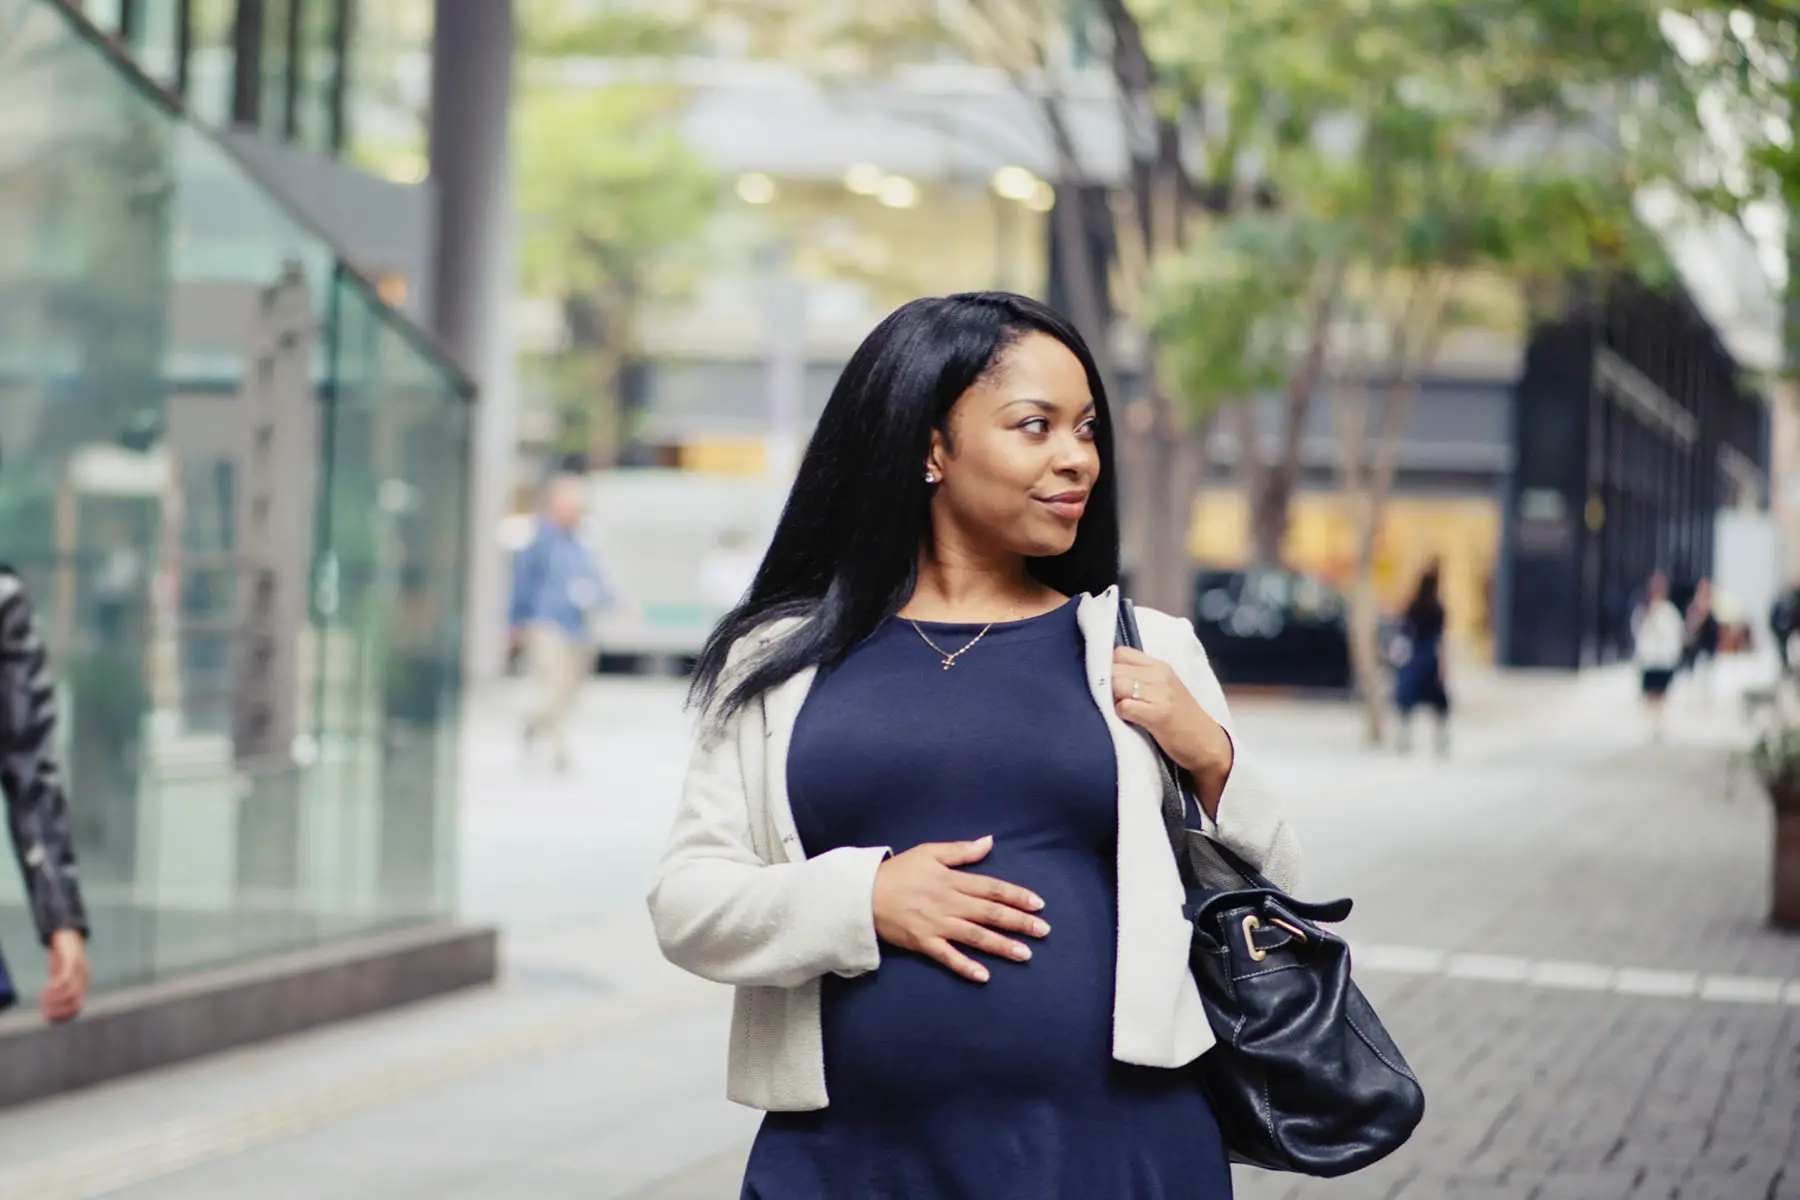 Pregnant woman looking gorgeous while strutting downtown with one hand on her belly.